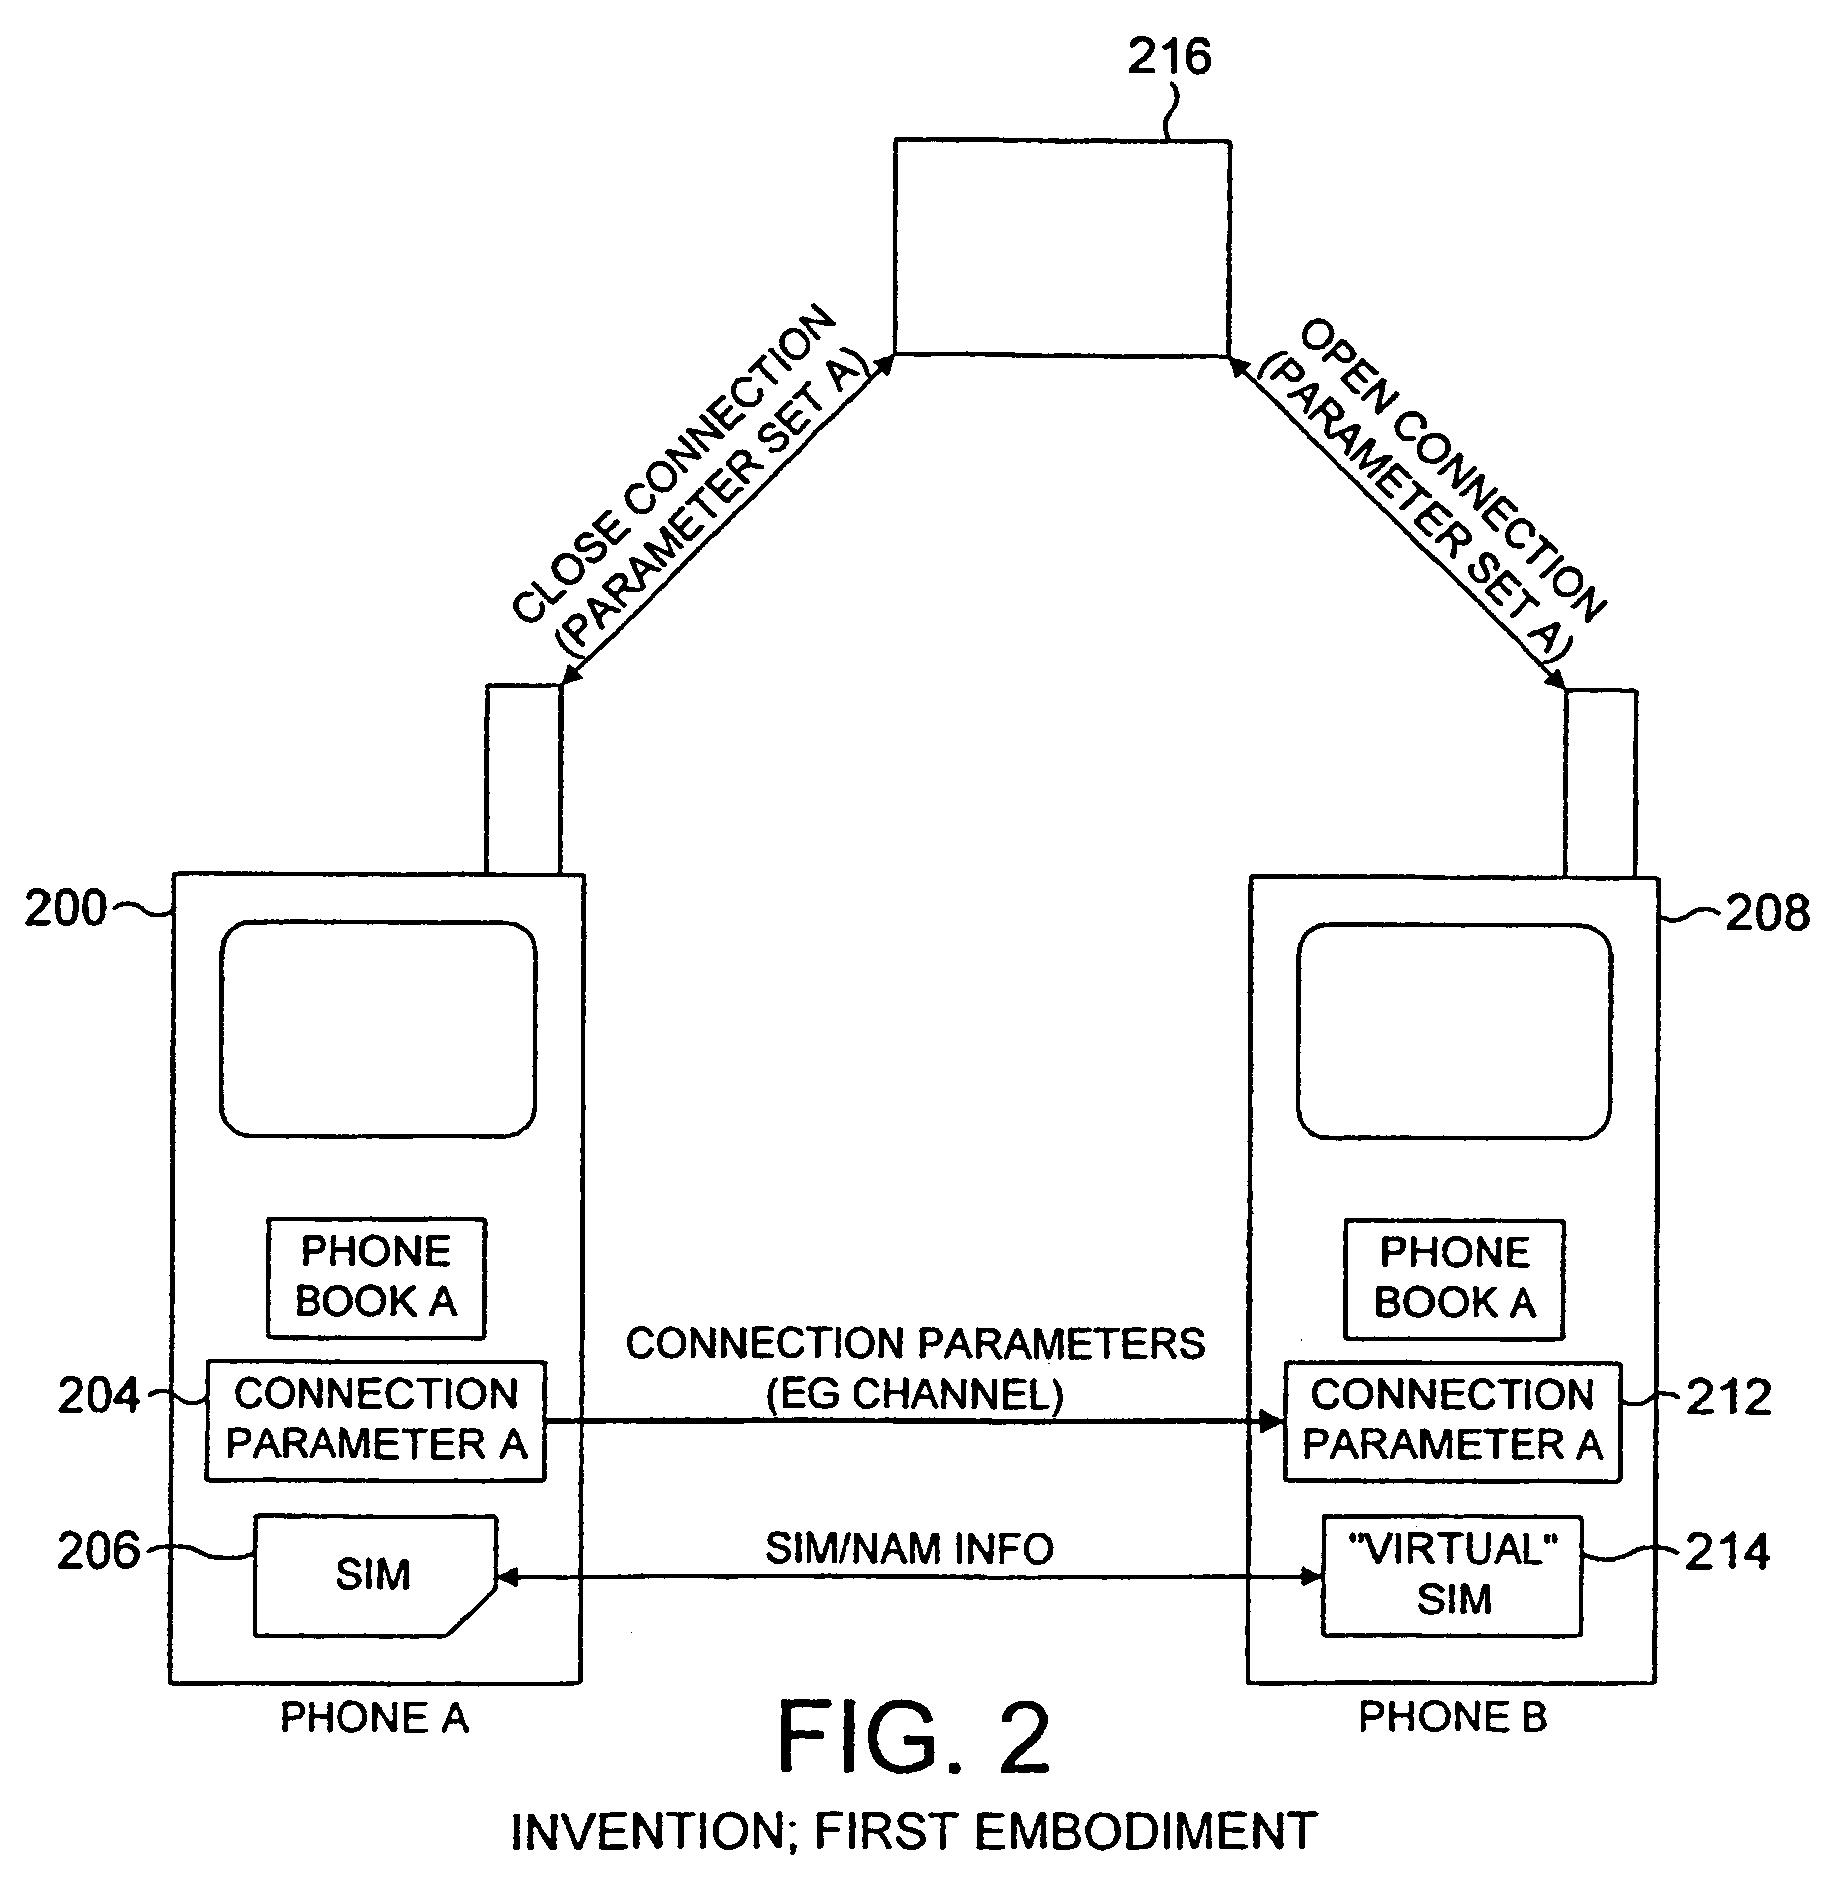 Radio telephone system allowing exchange of call setup parameters between associated or commonly owned mobile devices